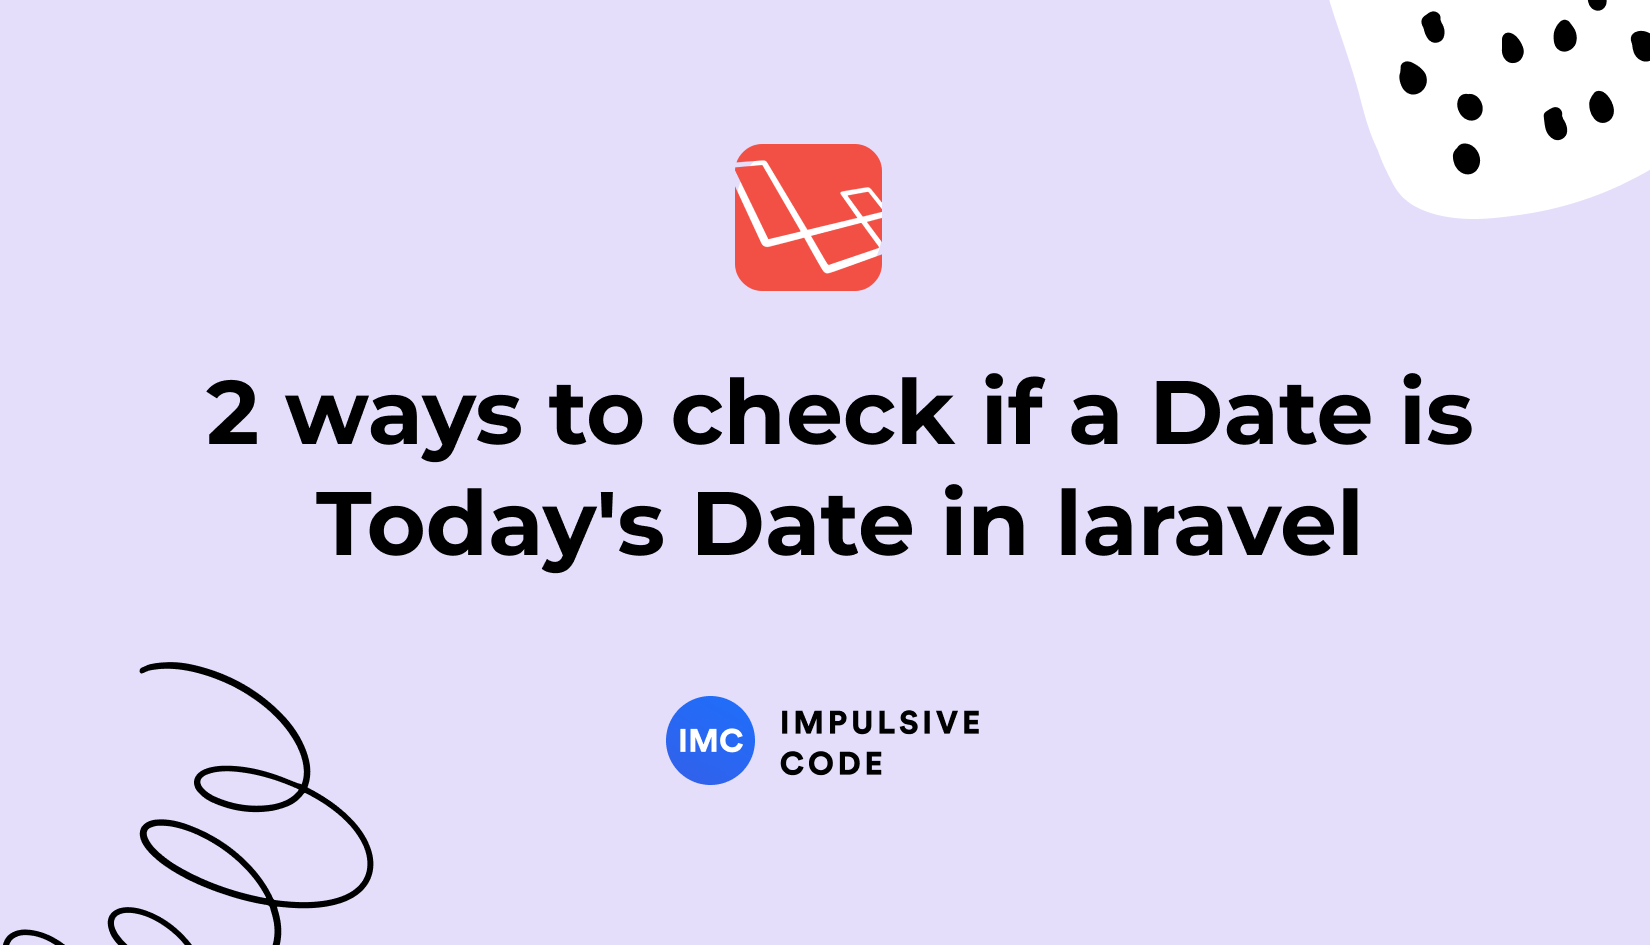 2 ways to check if a Date is Today’s Date in laravel